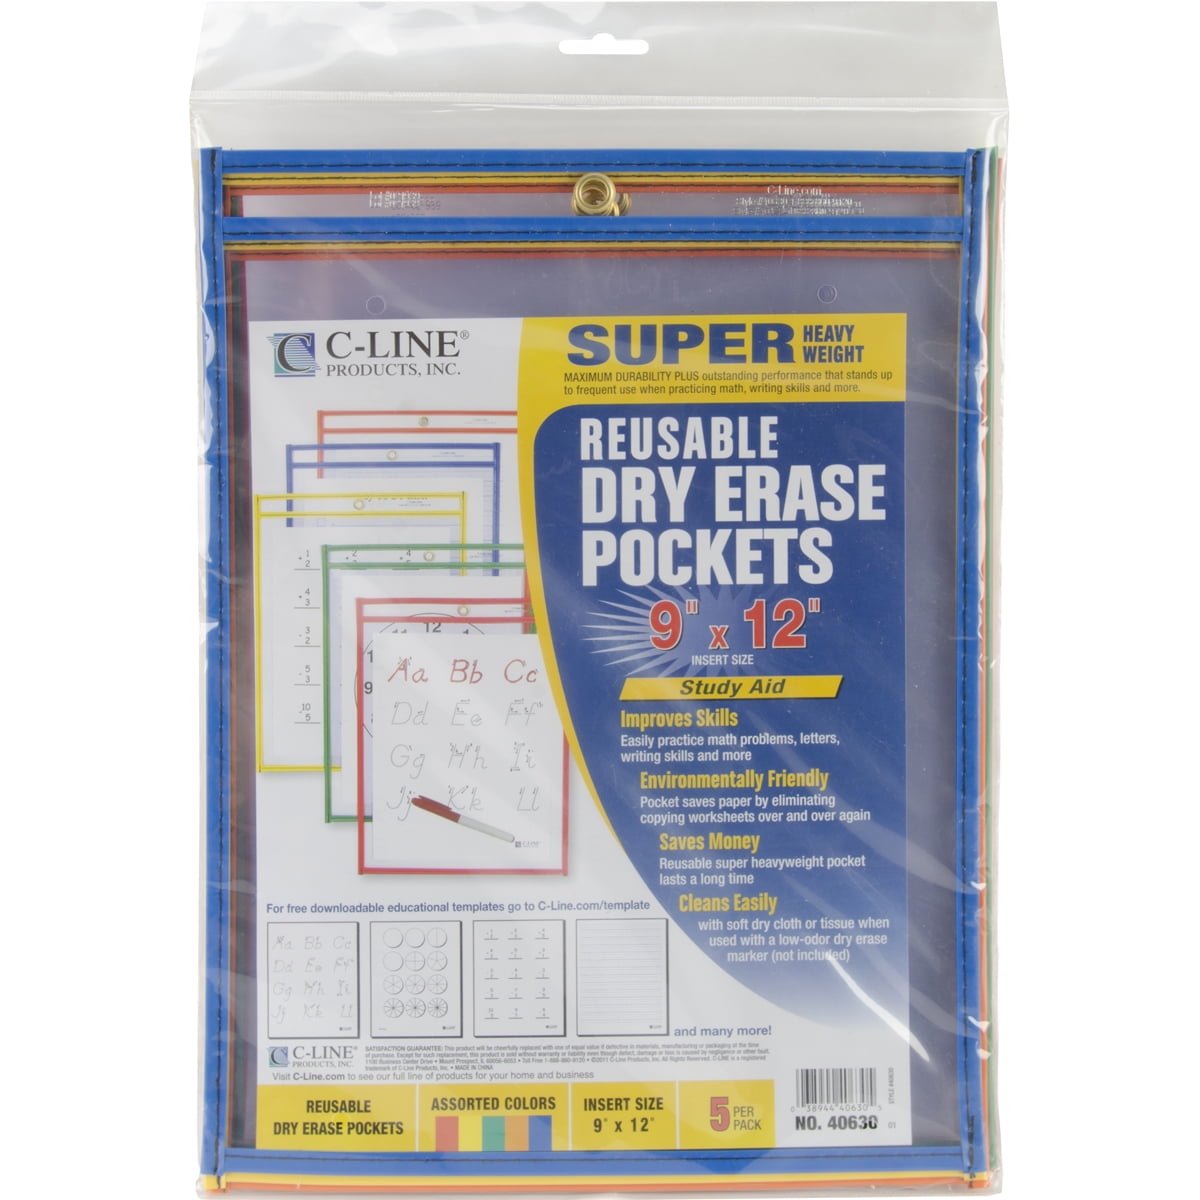 50 Thornton's Office Supplies Reusable Dry Erase Pockets 9 x 12 Assorted Colors 